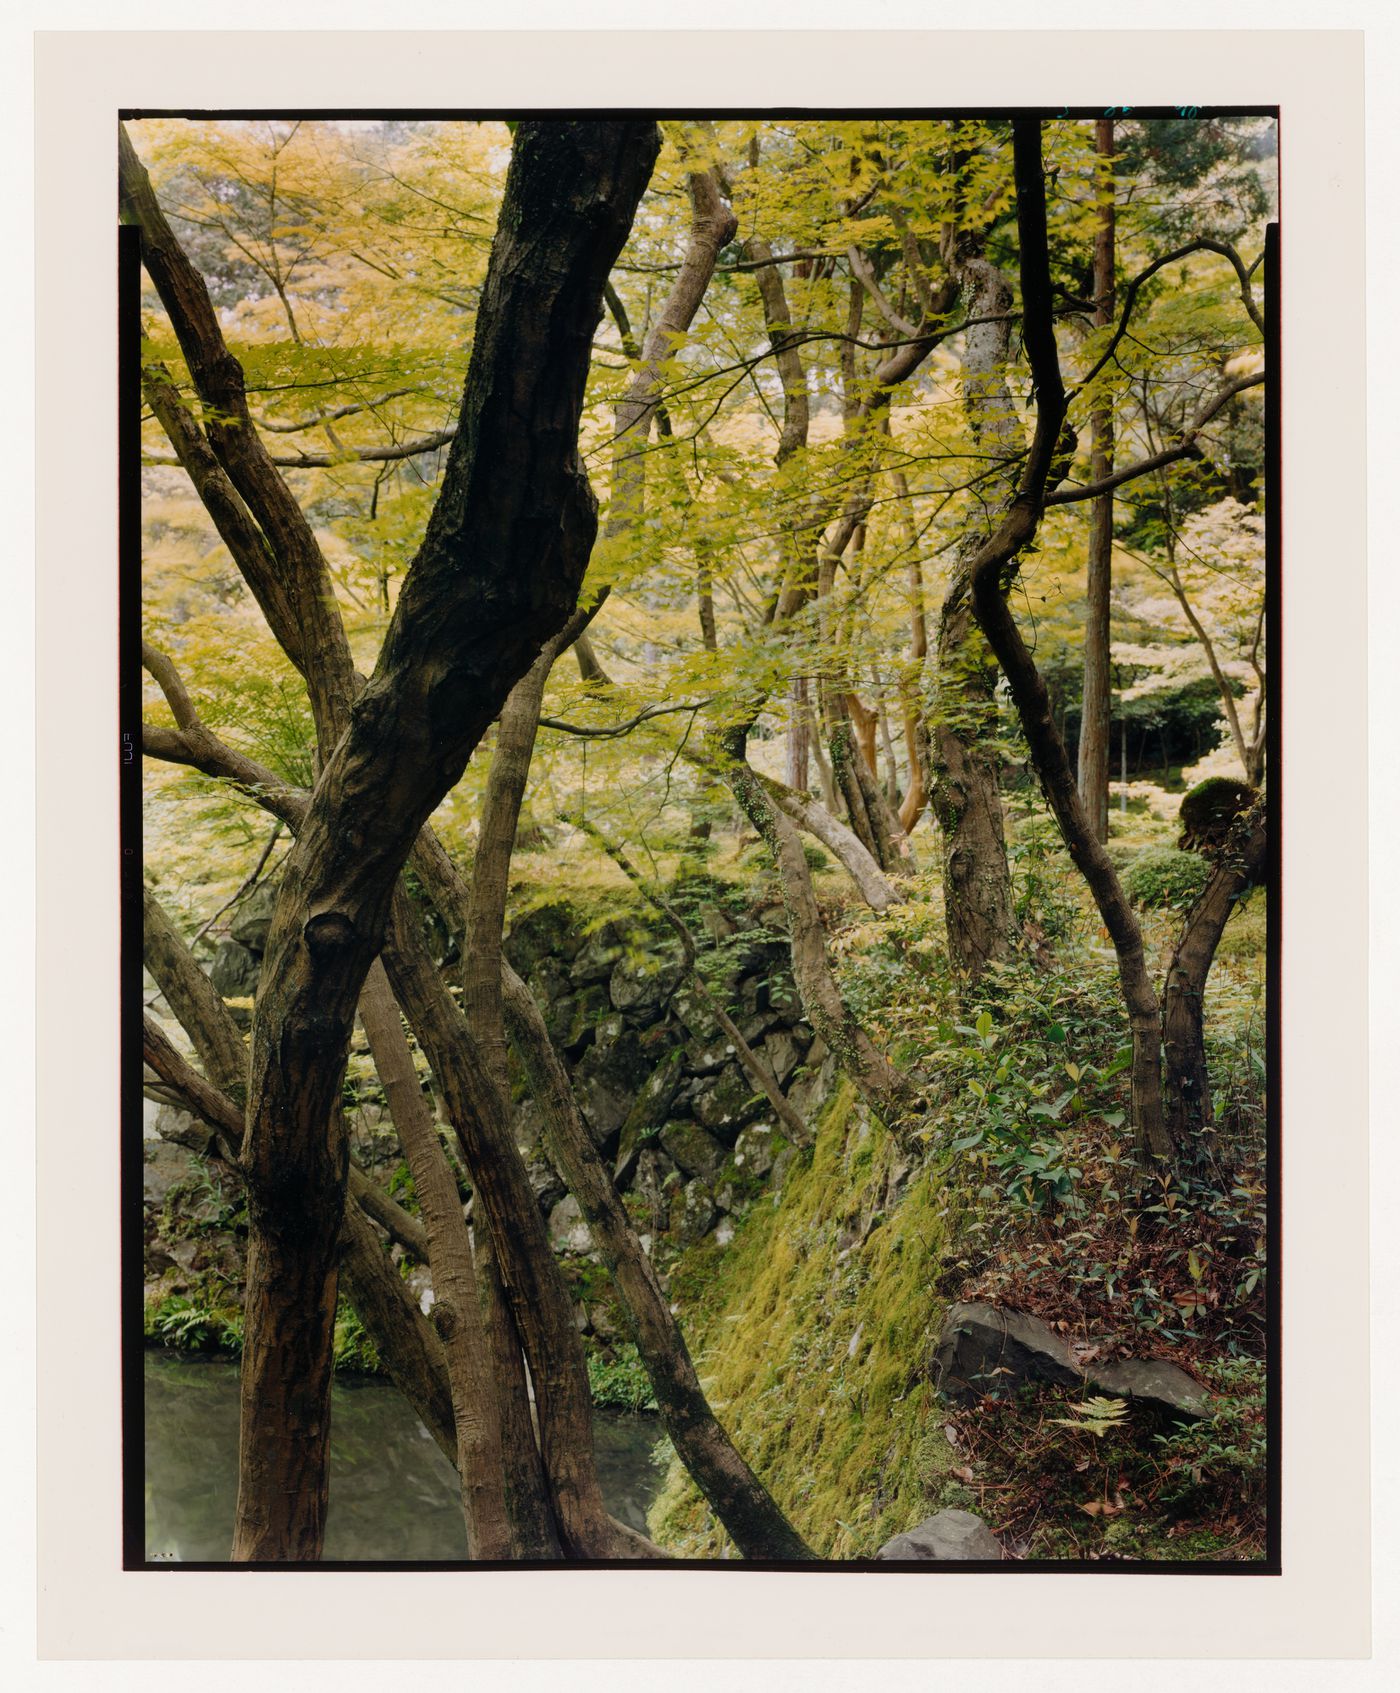 View of trees and a stone wall in the Moss Garden, Saihoji (also known as Kokedera [Moss Temple]), Kyoto, Japan